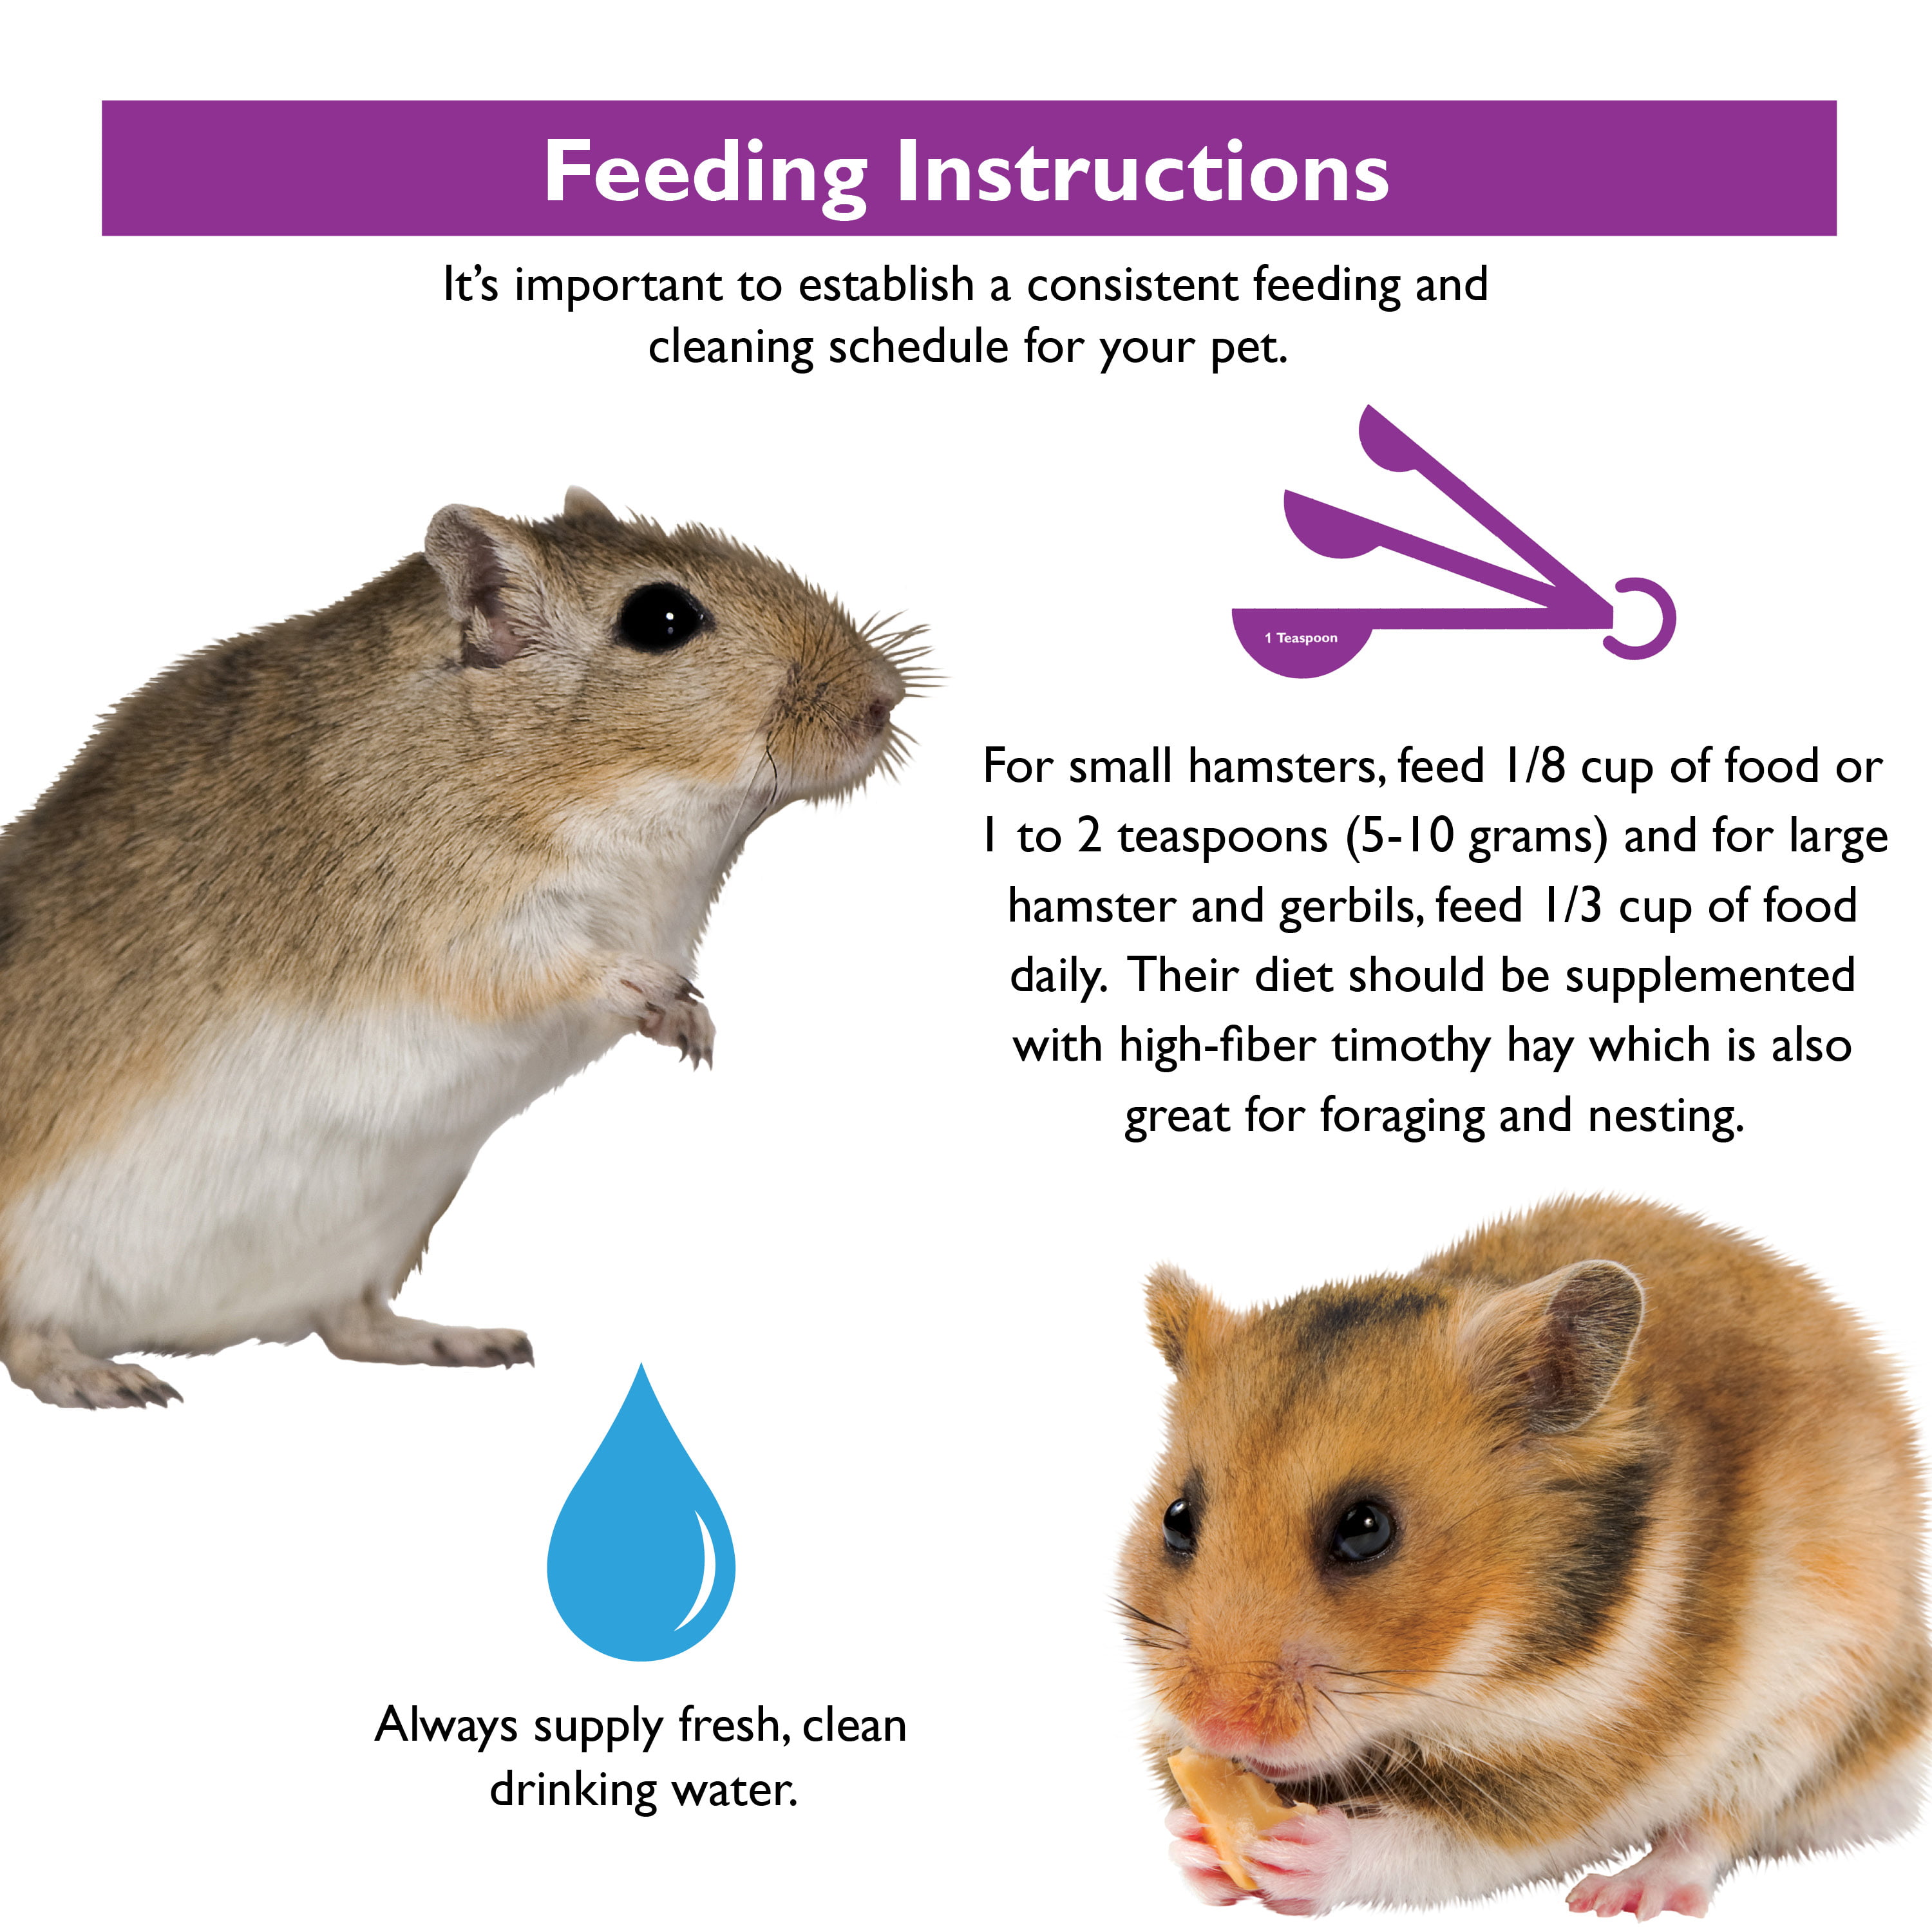 5. Importance of fresh food and water for hamsters